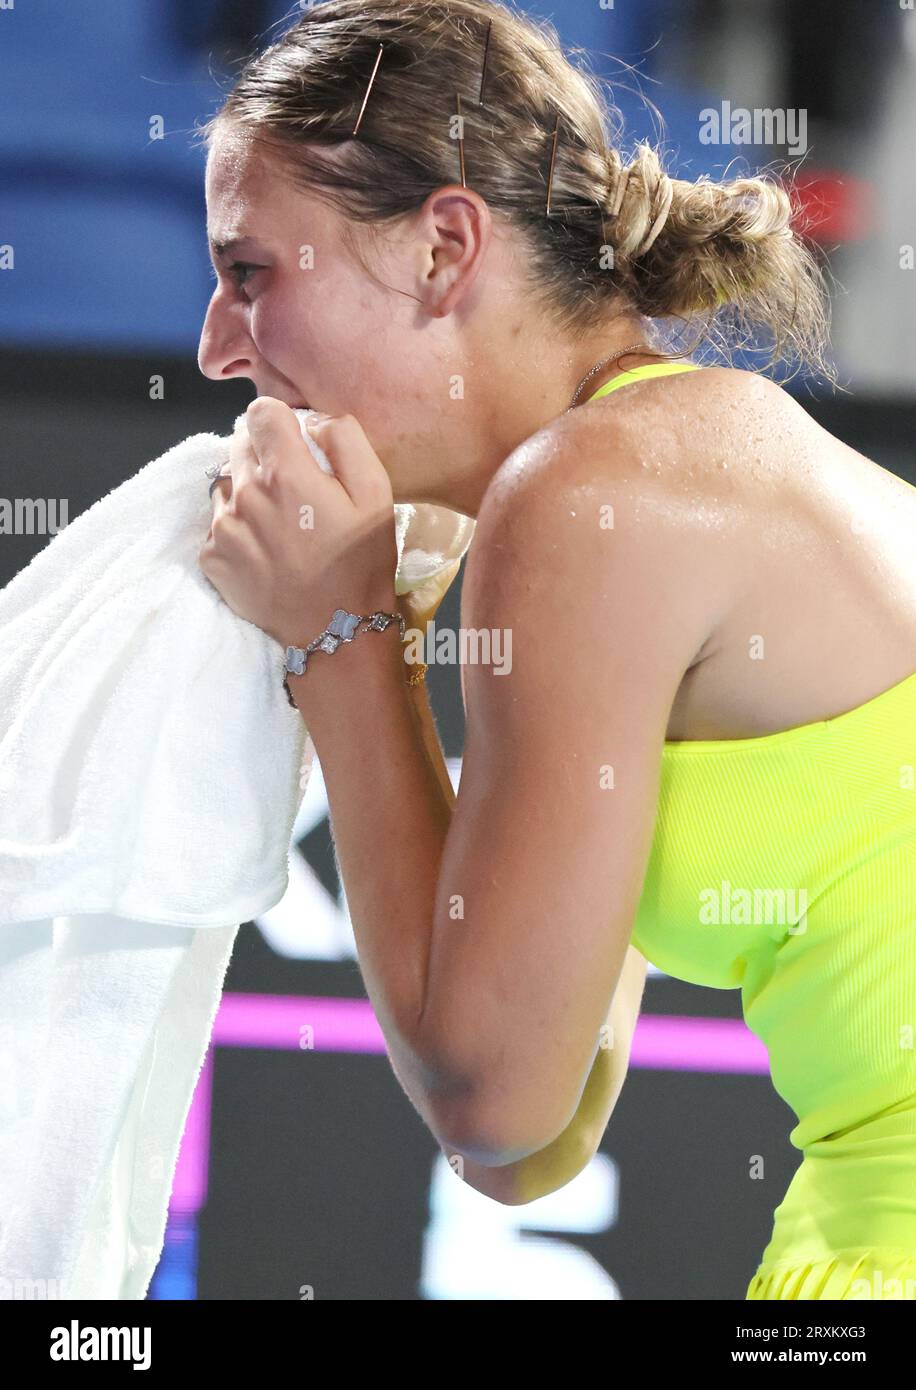 Tokyo, Japan. 26th Sep, 2023. Marta Kostyuk of Ukraine cries as she lost a gamel against Russia's Daria Kasatkina during the first round match of the Toray pan Pacific Open tennis tournament at the Ariake Colosseum in Tokyo on Tuesday, September 26, 2023. Kostyuk was defeated by Kasatkina 6-3, 4-6, 3-6. (photo by Yoshio Tsunoda/AFLO) Credit: Aflo Co. Ltd./Alamy Live News Stock Photo